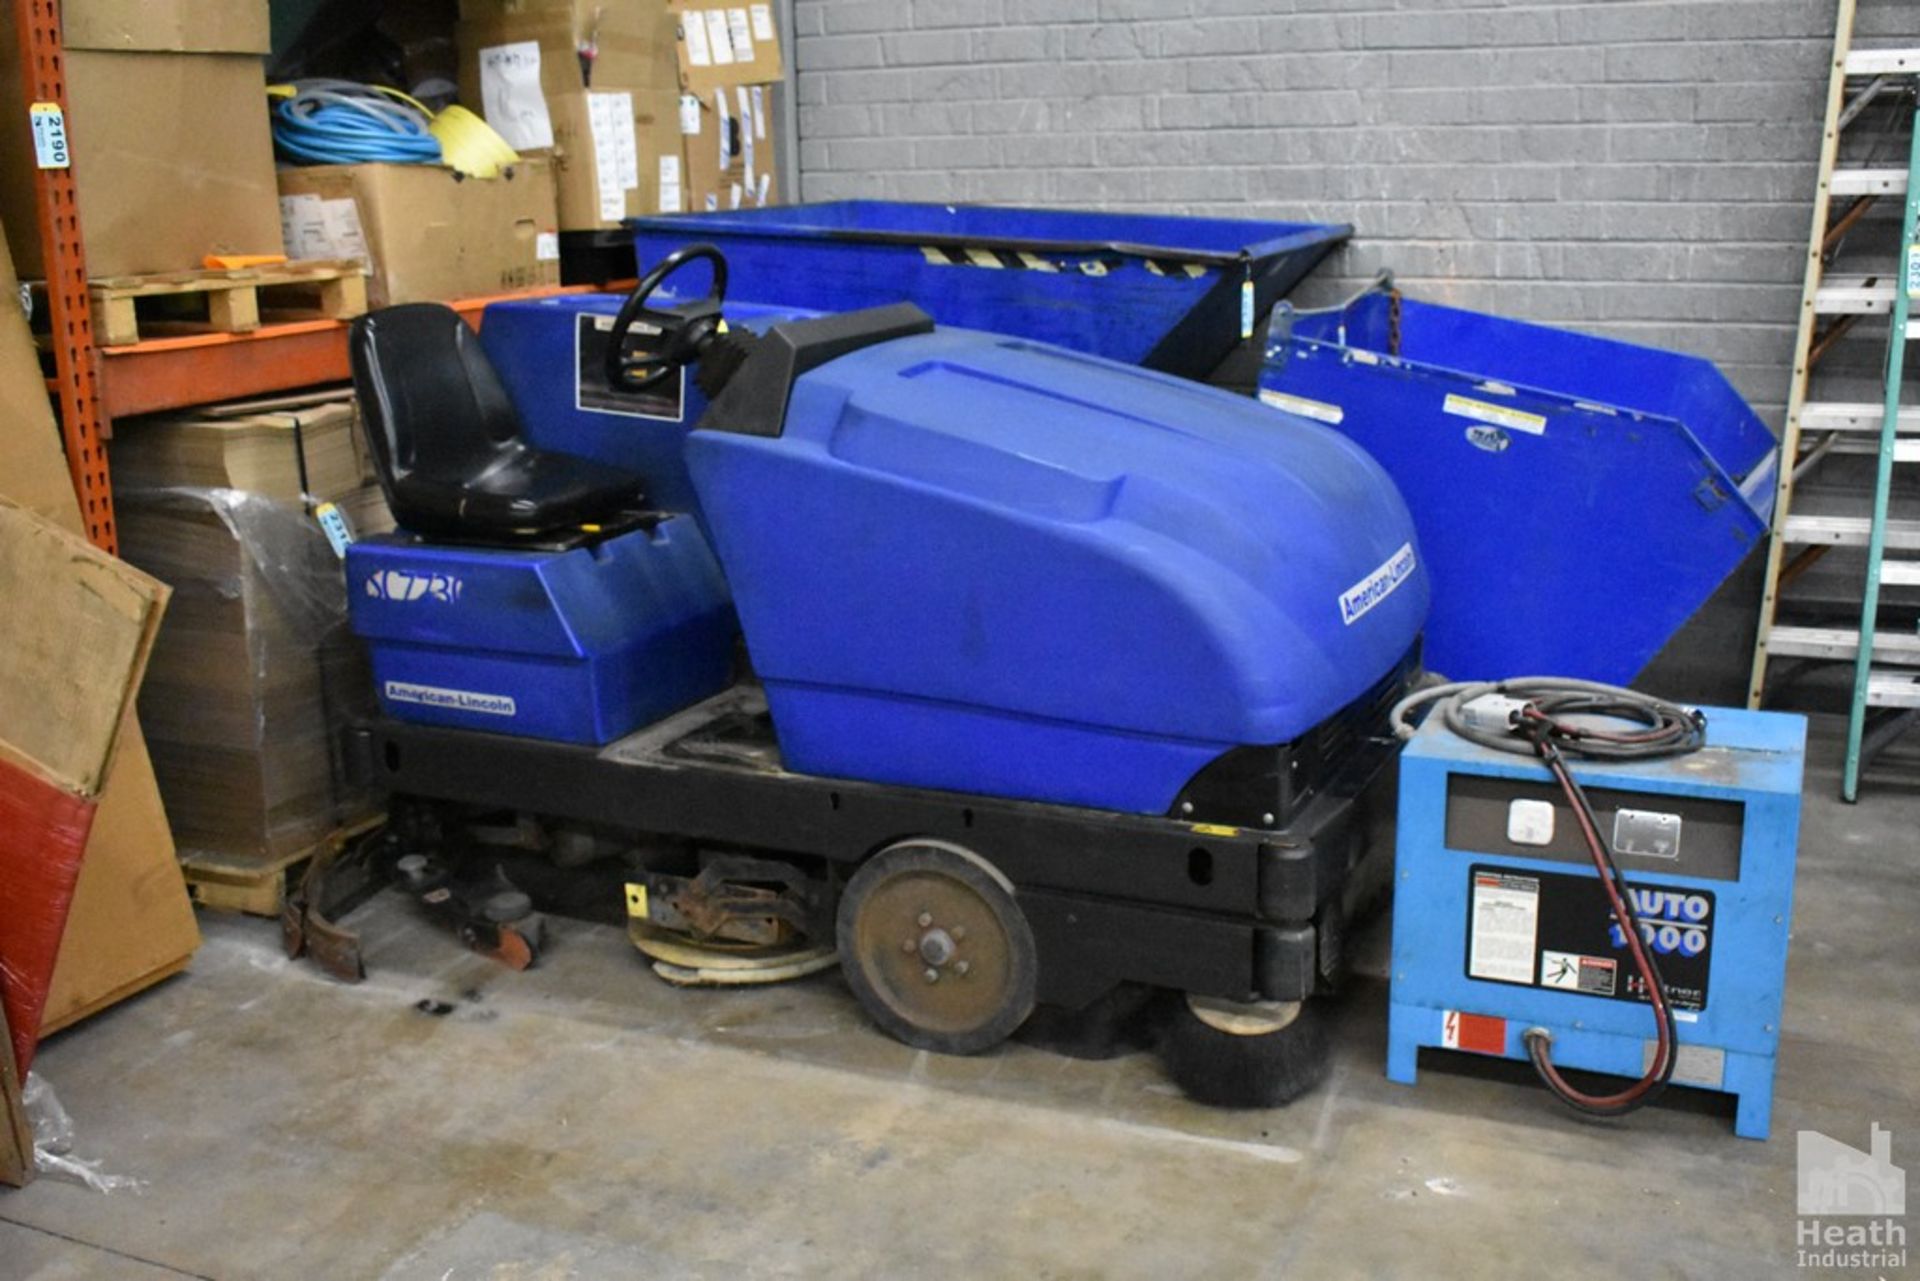 AMERICAN-LINCOLN MODEL 505-322 ELECTRIC FLOOR SWEEPER, 36 VOLT, S/N 692120, LENGTH 8'', WIDTH 4' - Image 8 of 10